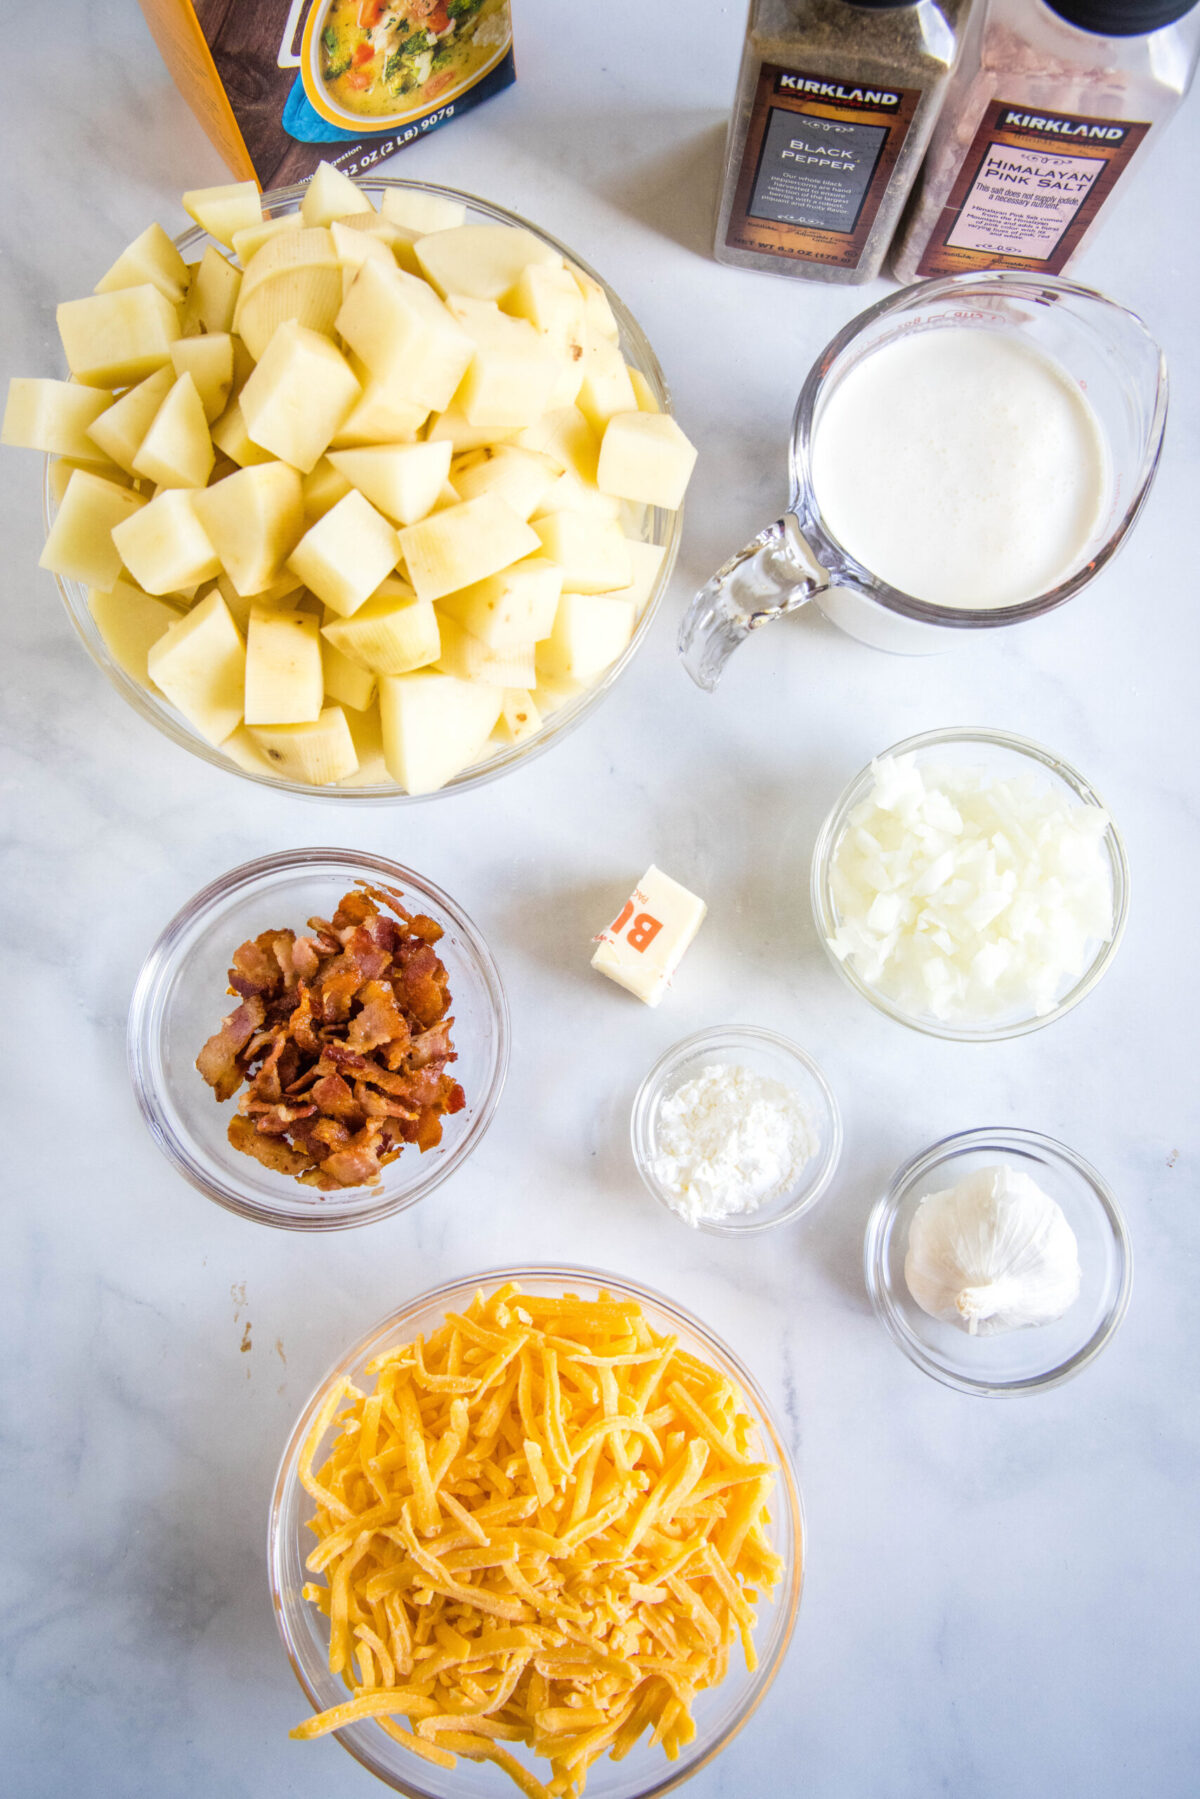 Overhead view of the ingredients needed for Instant Pot potato soup: a bowl of chopped potatoes, a bowl of shredded cheese, a bowl of crumbled bacon, a pyrex of cream, a bowl of onions, a bowl of garlic, a bowl of cornstarch, som butter, a carton of chicken stock, and salt and pepper grinders.